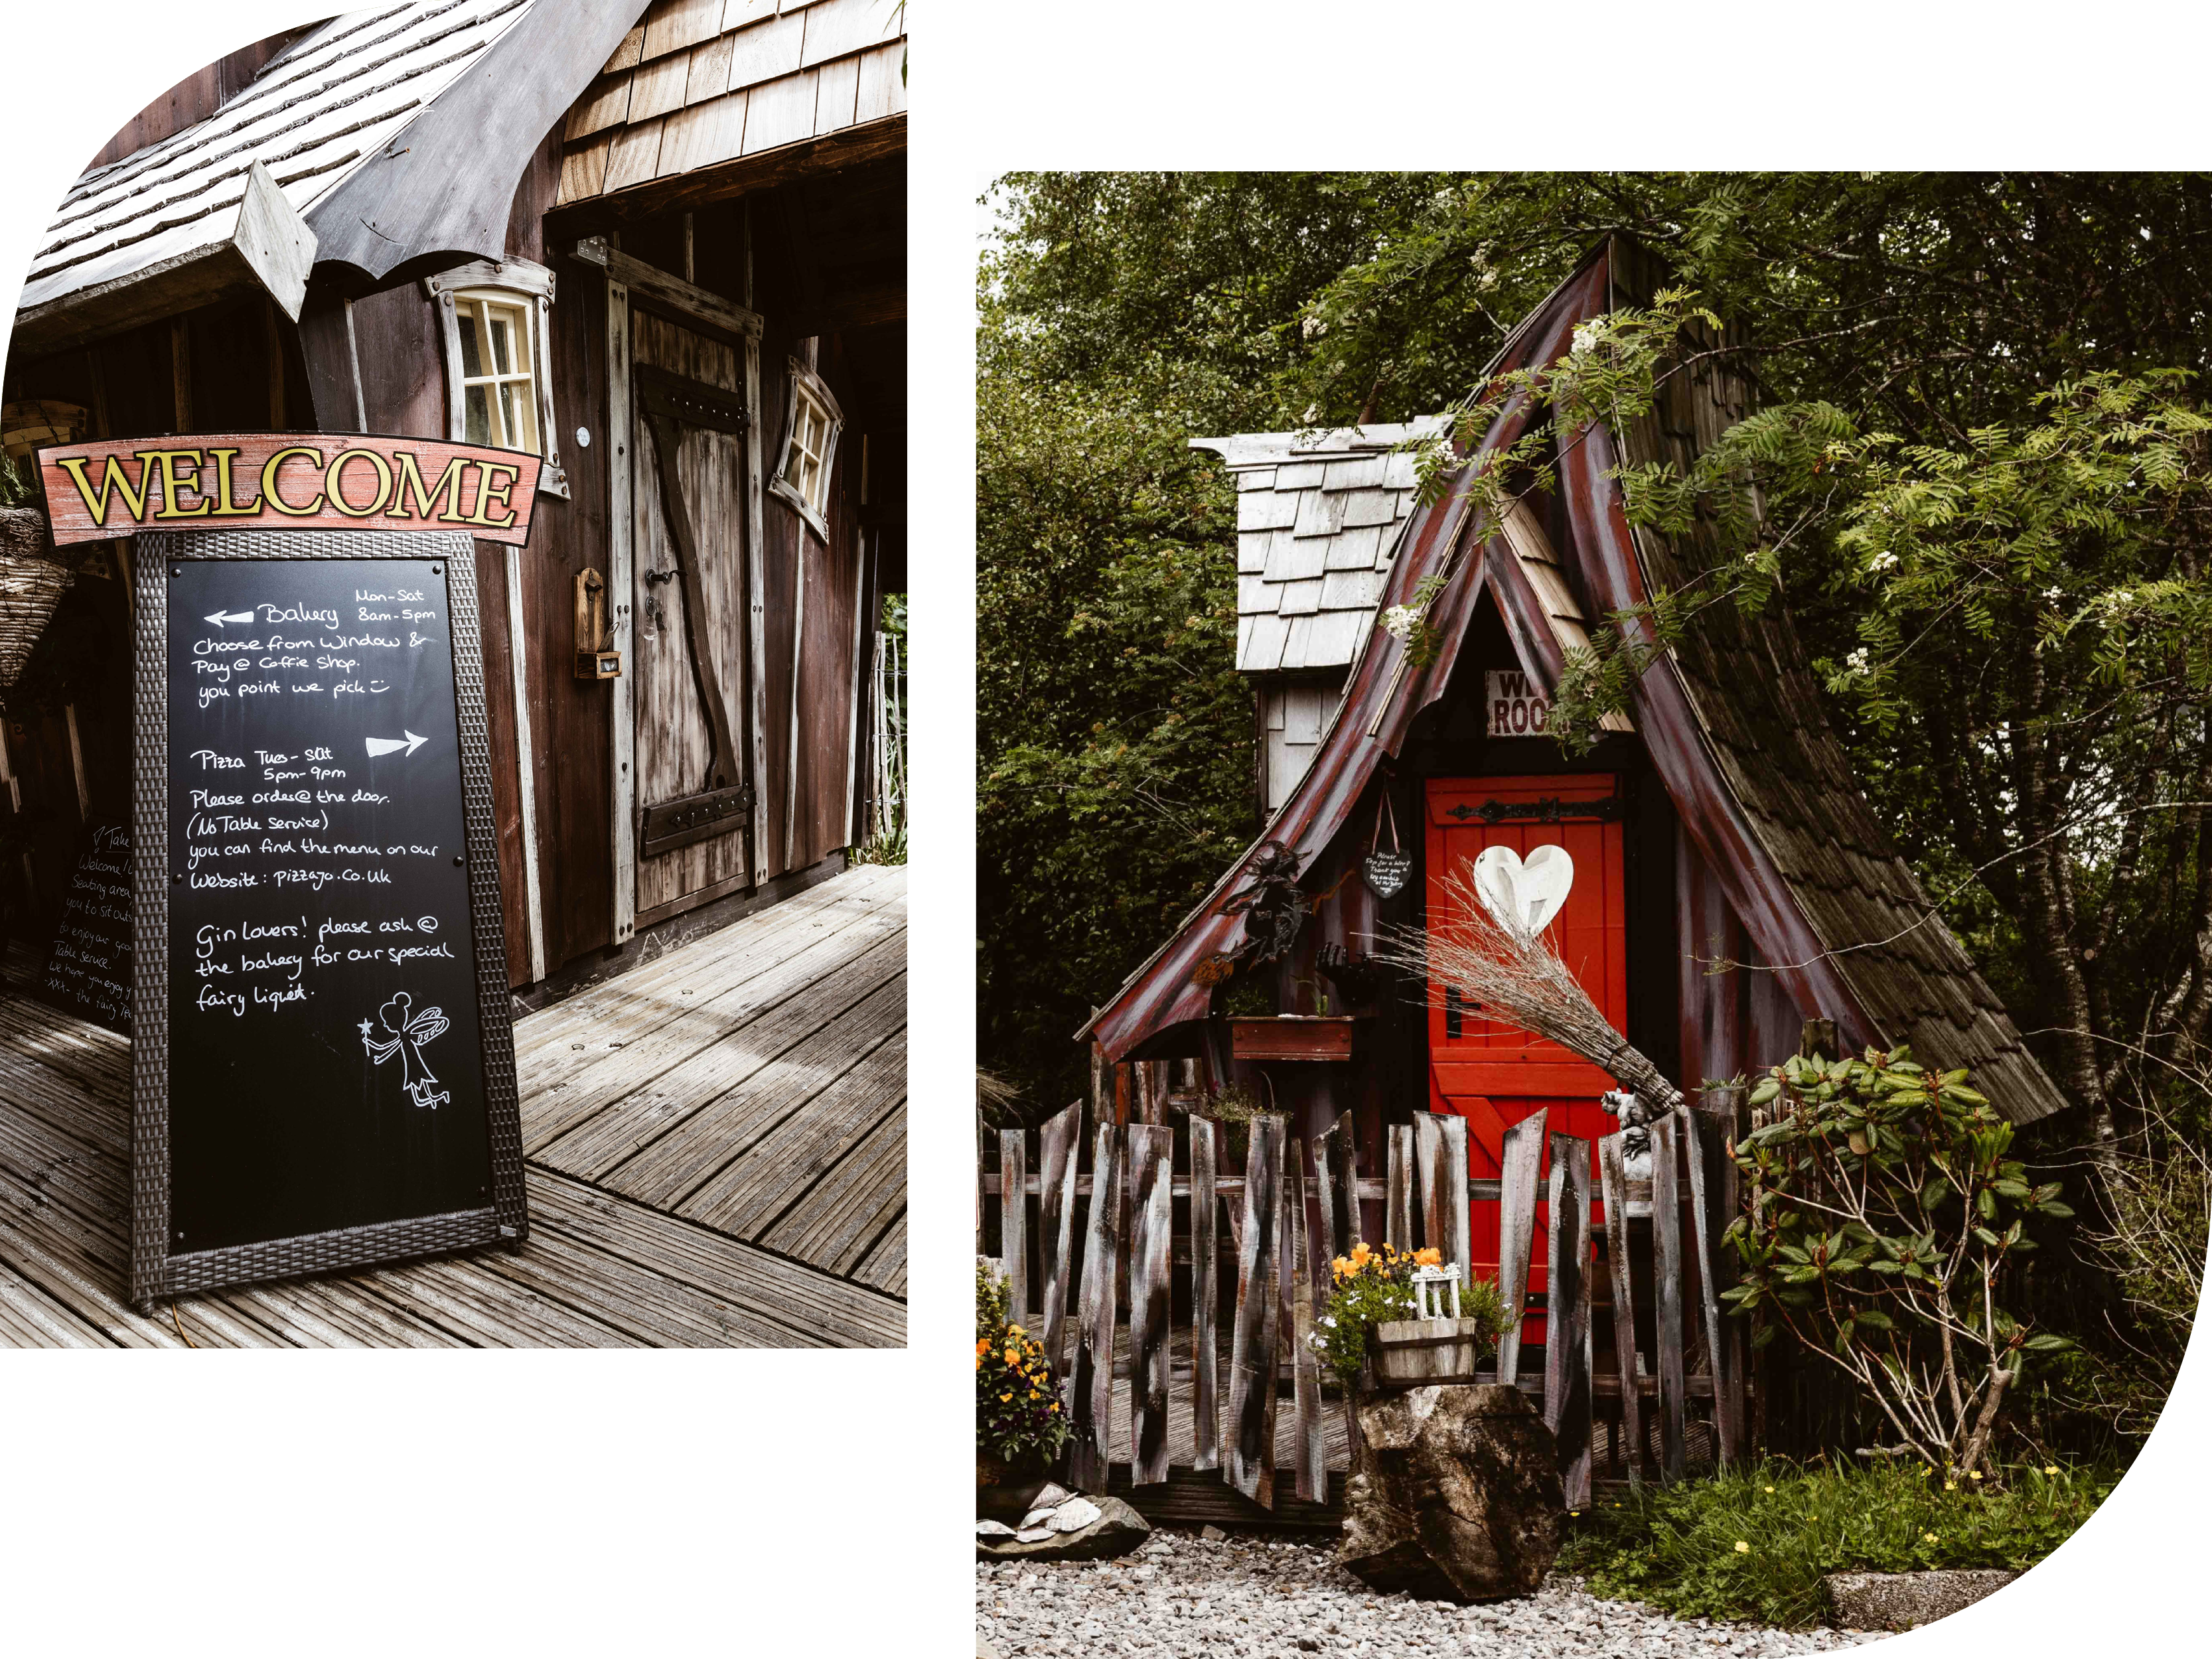 little wooden houses in a magical surrounding in the scottish highlands at fairytale distillery. Wee Room and entrance sign from Manuela's Wee Bakery